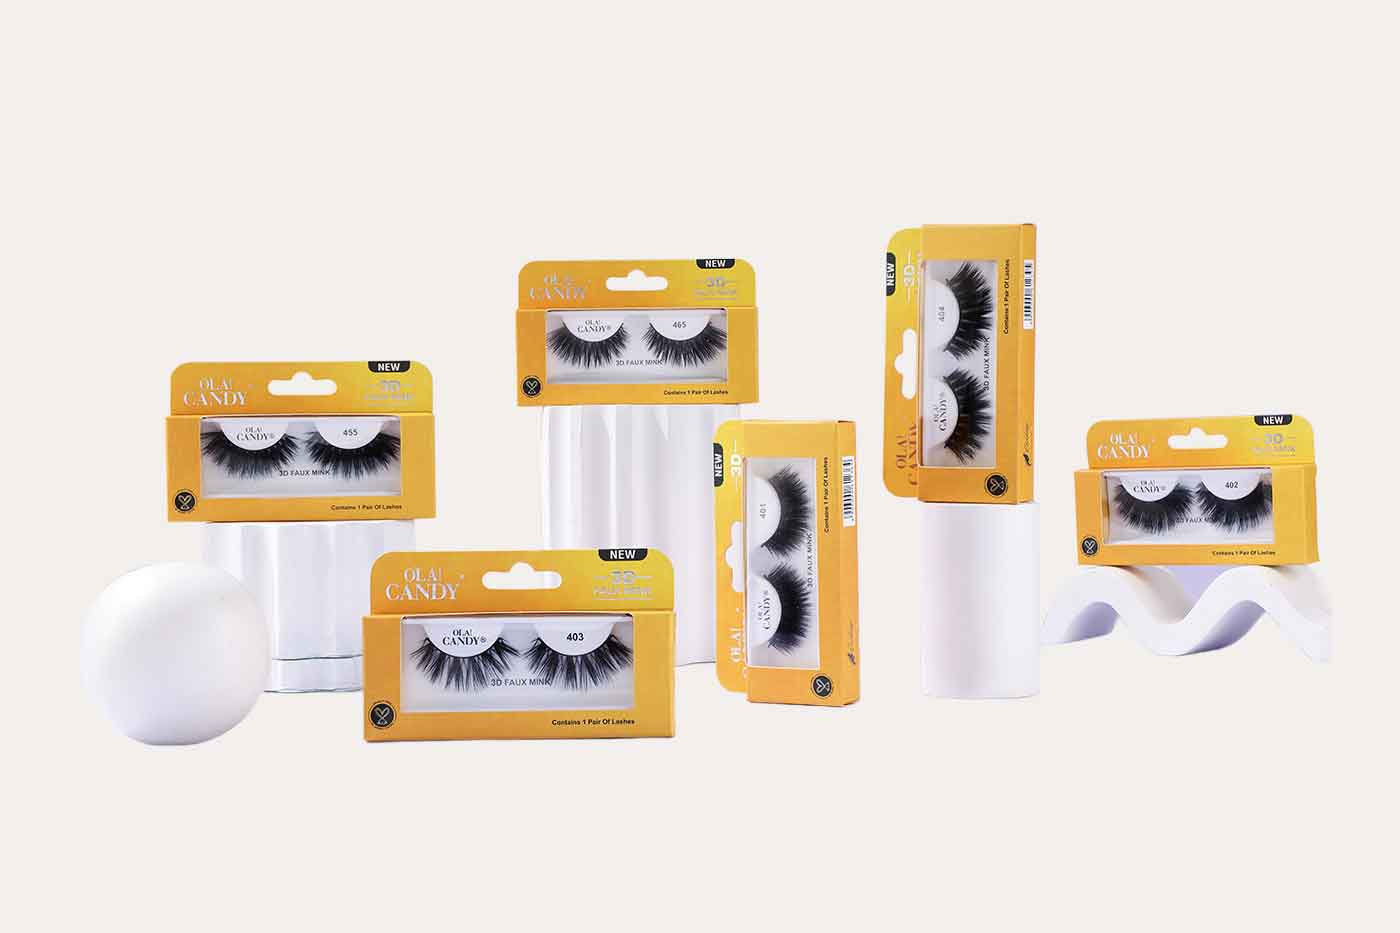 Get Bold and stunning eyes with OLA CANDY’s 3D Faux Mink lashes